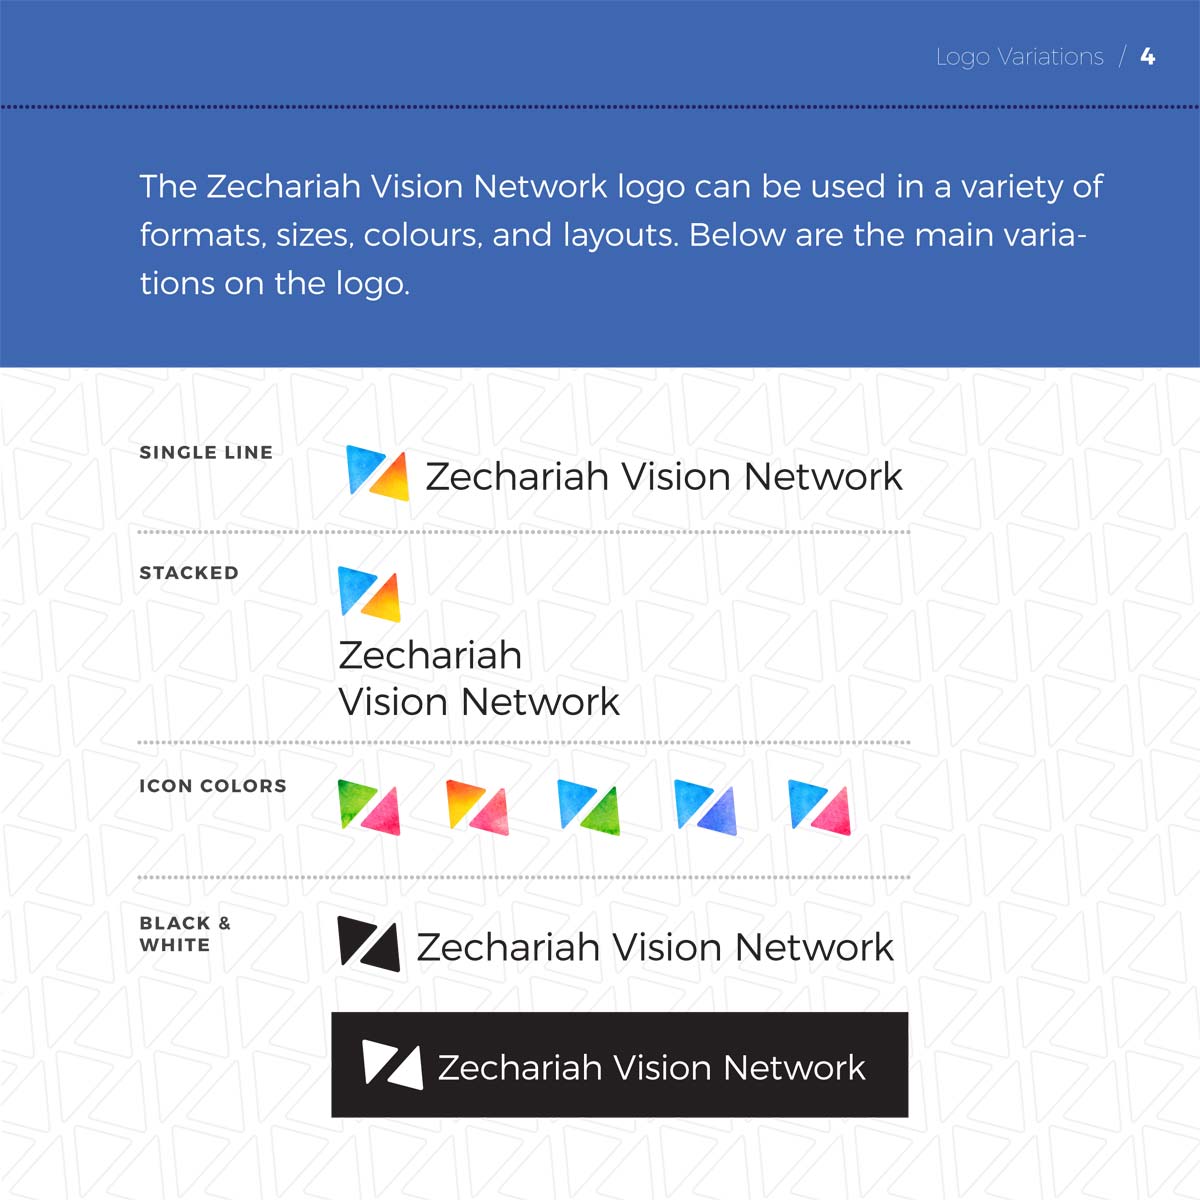 A screenshot of the Zechariah Vision Network brand guidelines